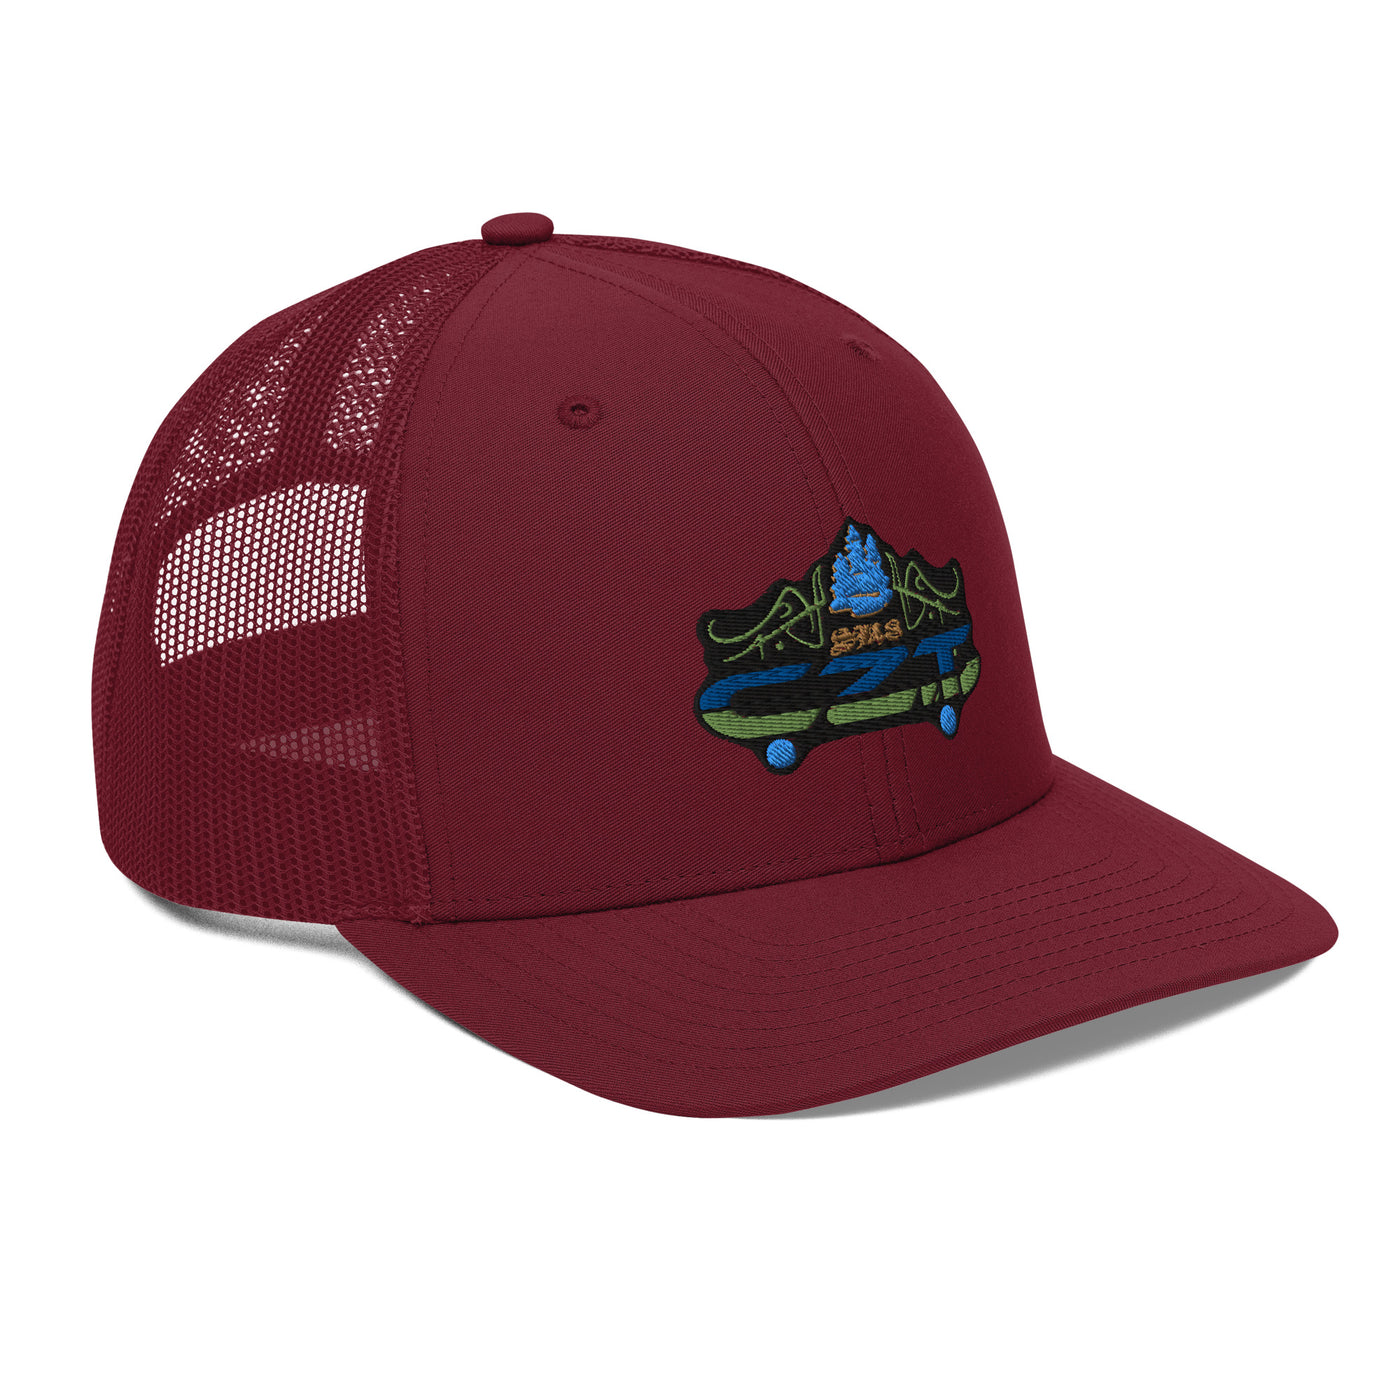 CZT SK8 Embroidered Trucker-Style Mesh Snapback Cap